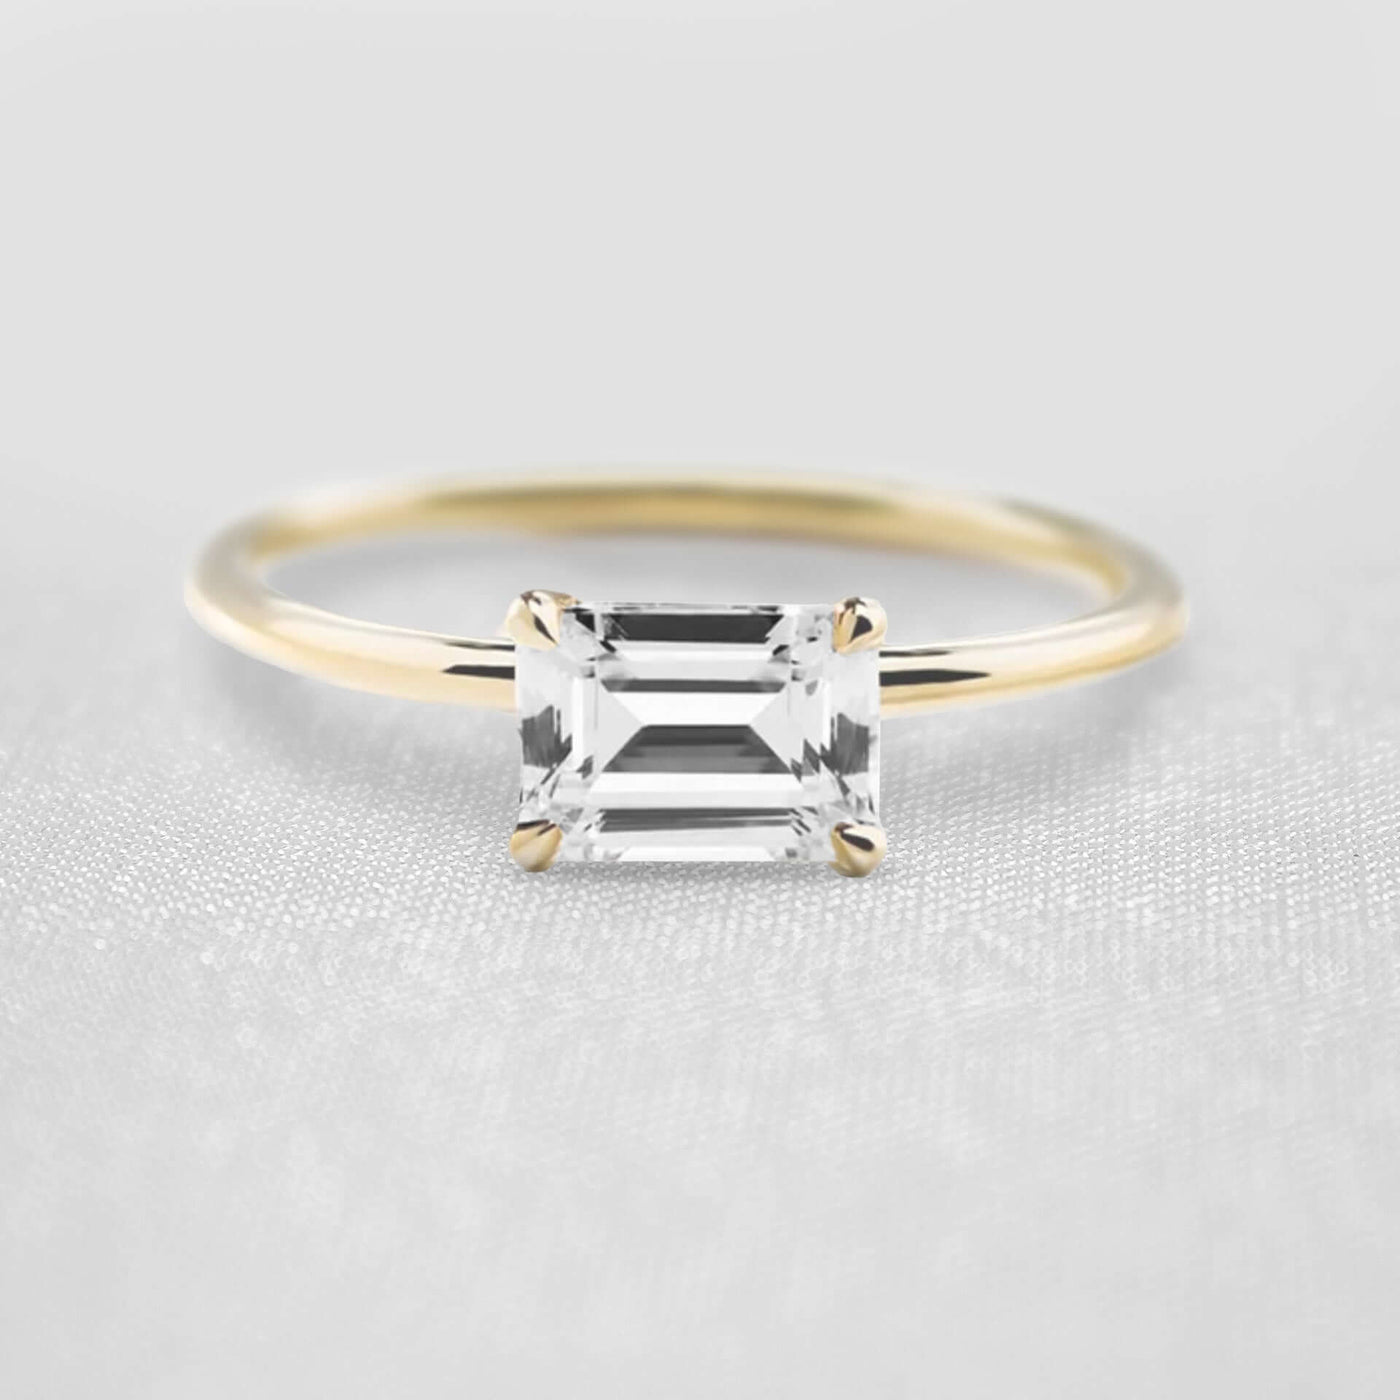 Shown in 1.0 Carat * The Mia East West Emerald Cut Diamond Solitaire Engagement Ring | Lisa Robin#shape_emerald